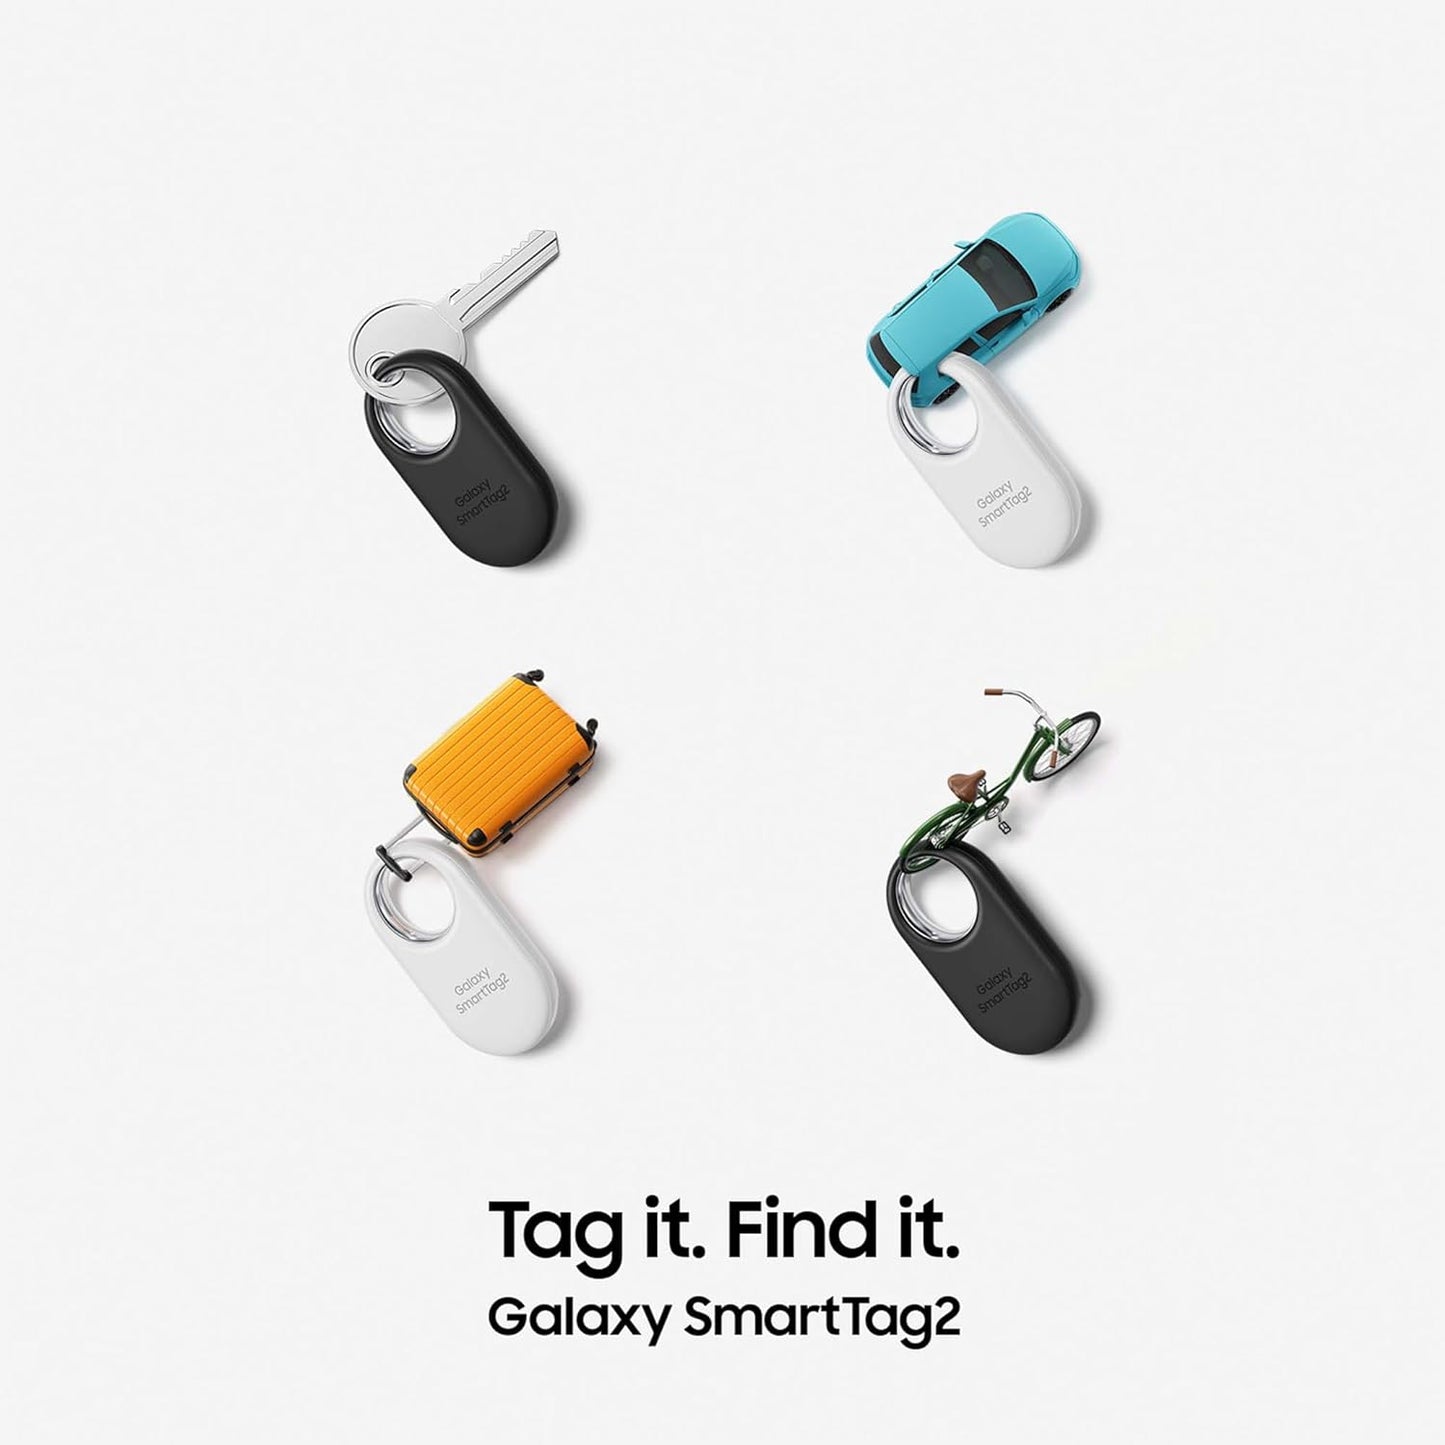 Galaxy Smarttag2 Bluetooth Tracker (1 Pack), Compass View AR, Find Lost Mode, Black